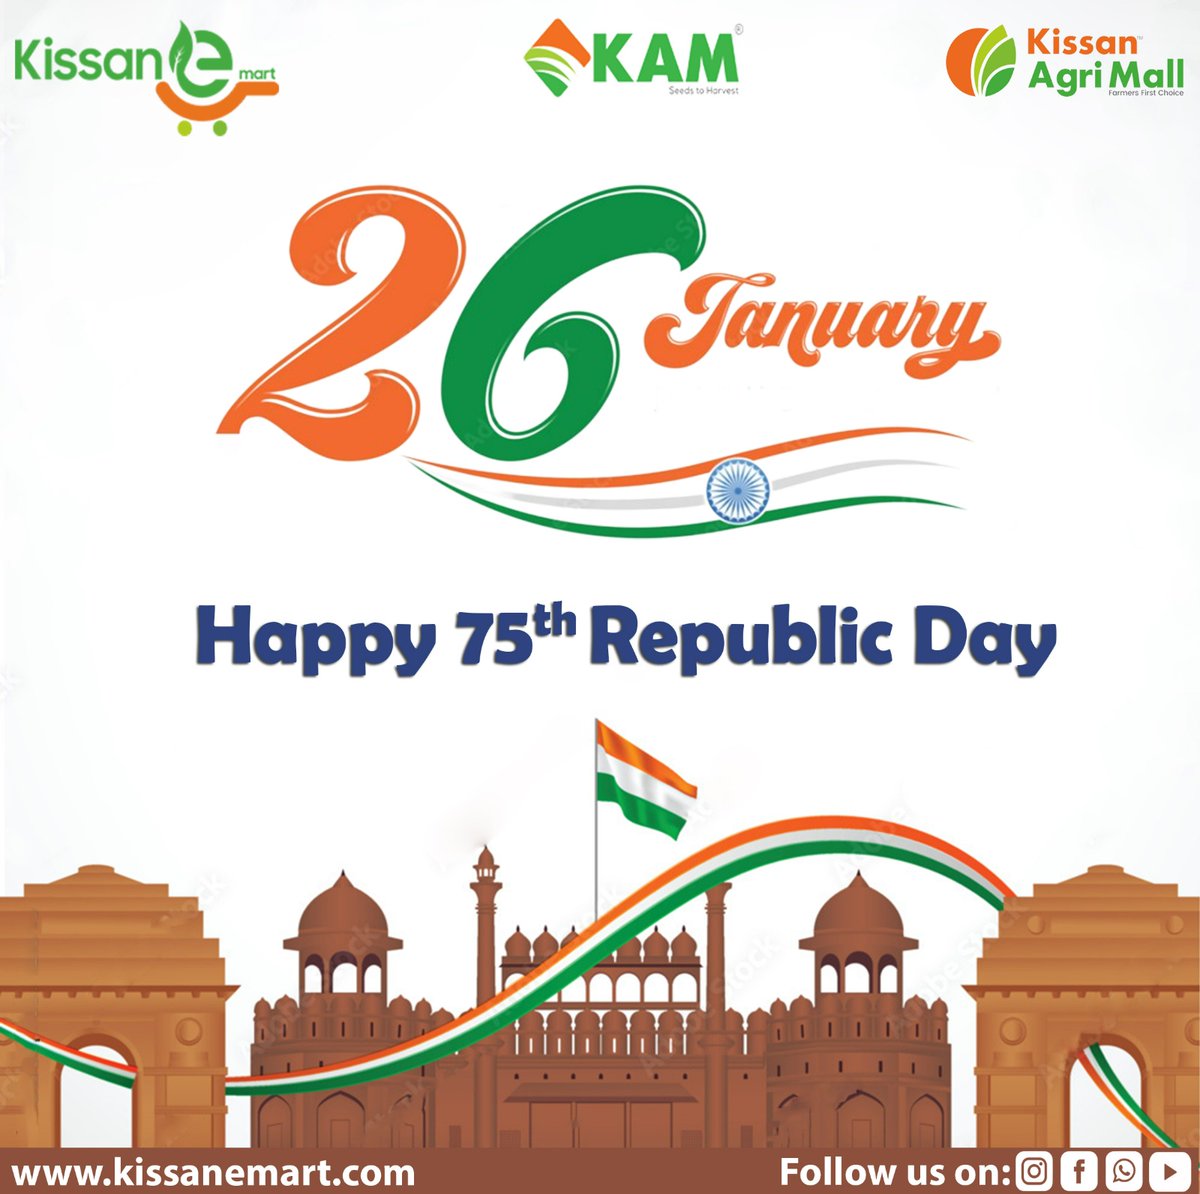 Let's celebrate the glory of our nation and honor the sacrifices of those who fought for our freedom. Wishing you a Happy Republic Day!

#republicday 
#republicindia 
#happyrepublicday 
#kissanagrimall 
#kissanemart 
#indianfarmers 
#agriculture